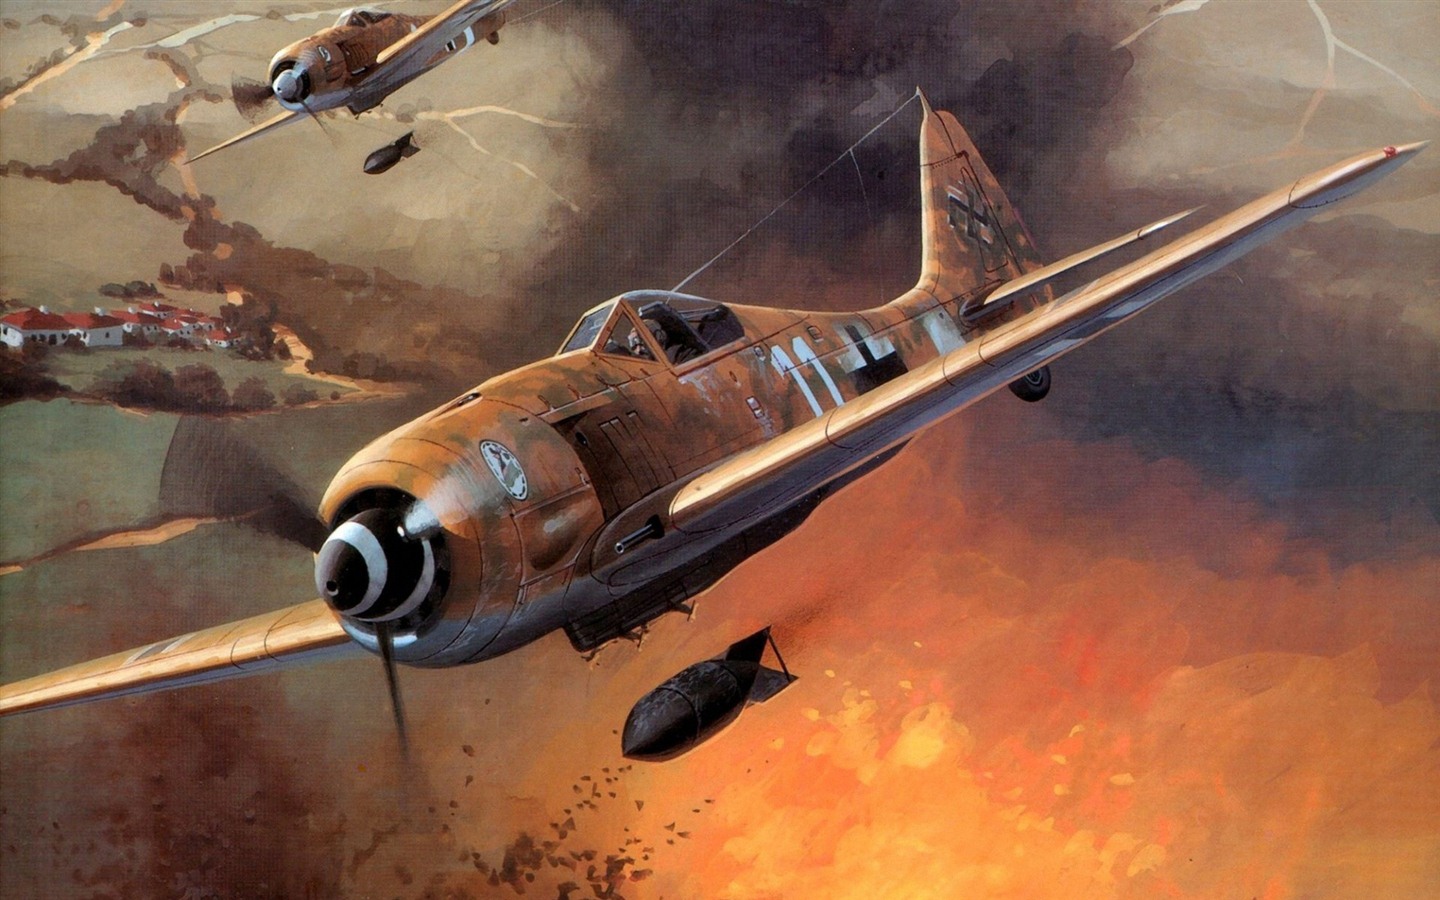 Military aircraft flight exquisite painting wallpapers #6 - 1440x900